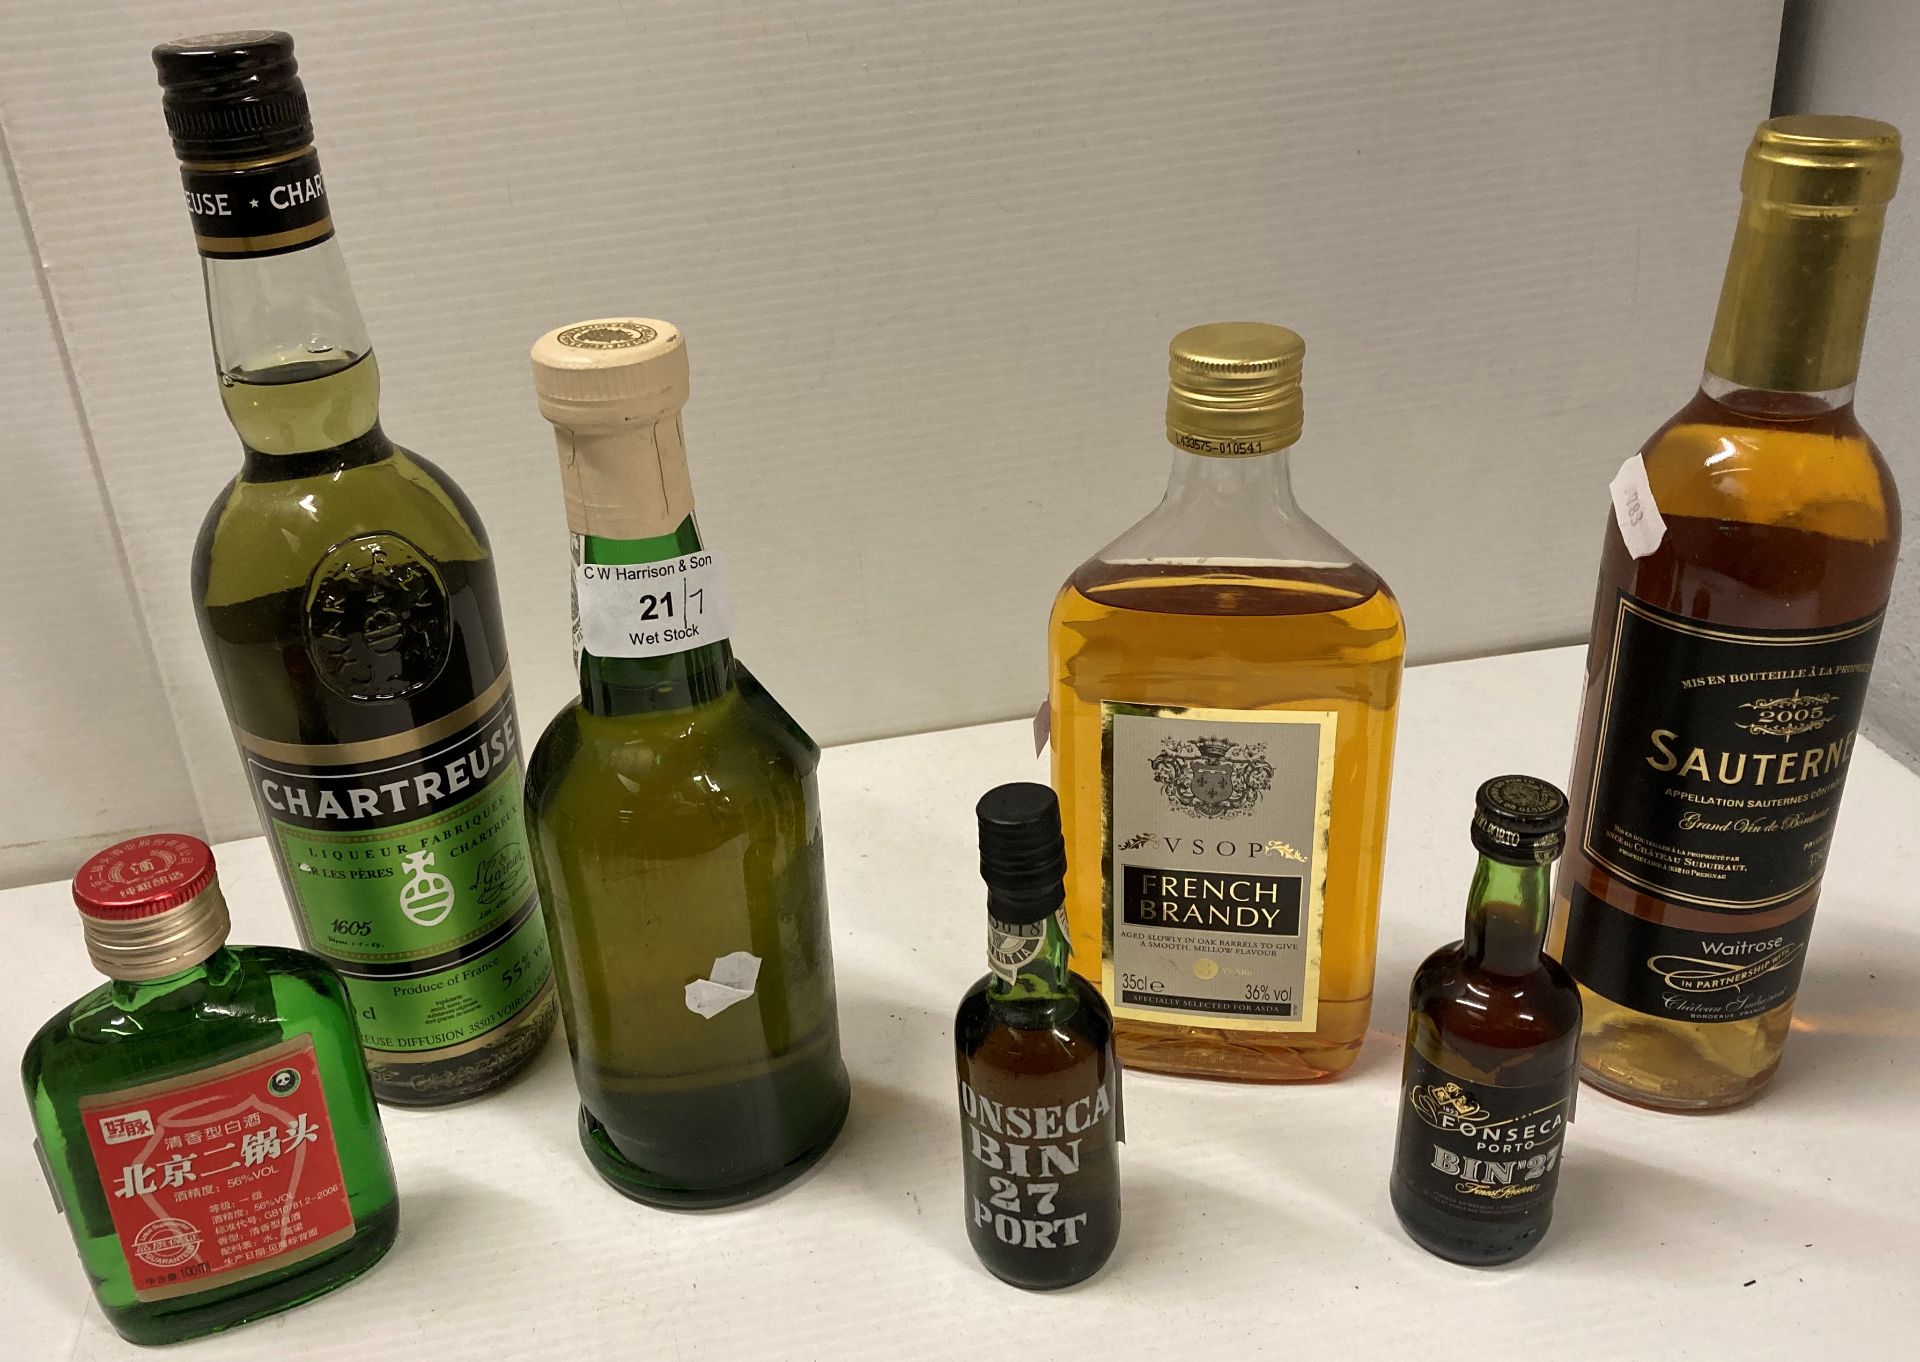 7 x items - 2 x miniature bottles of Port, a 50cl bottle of Chartreuse, a 37.